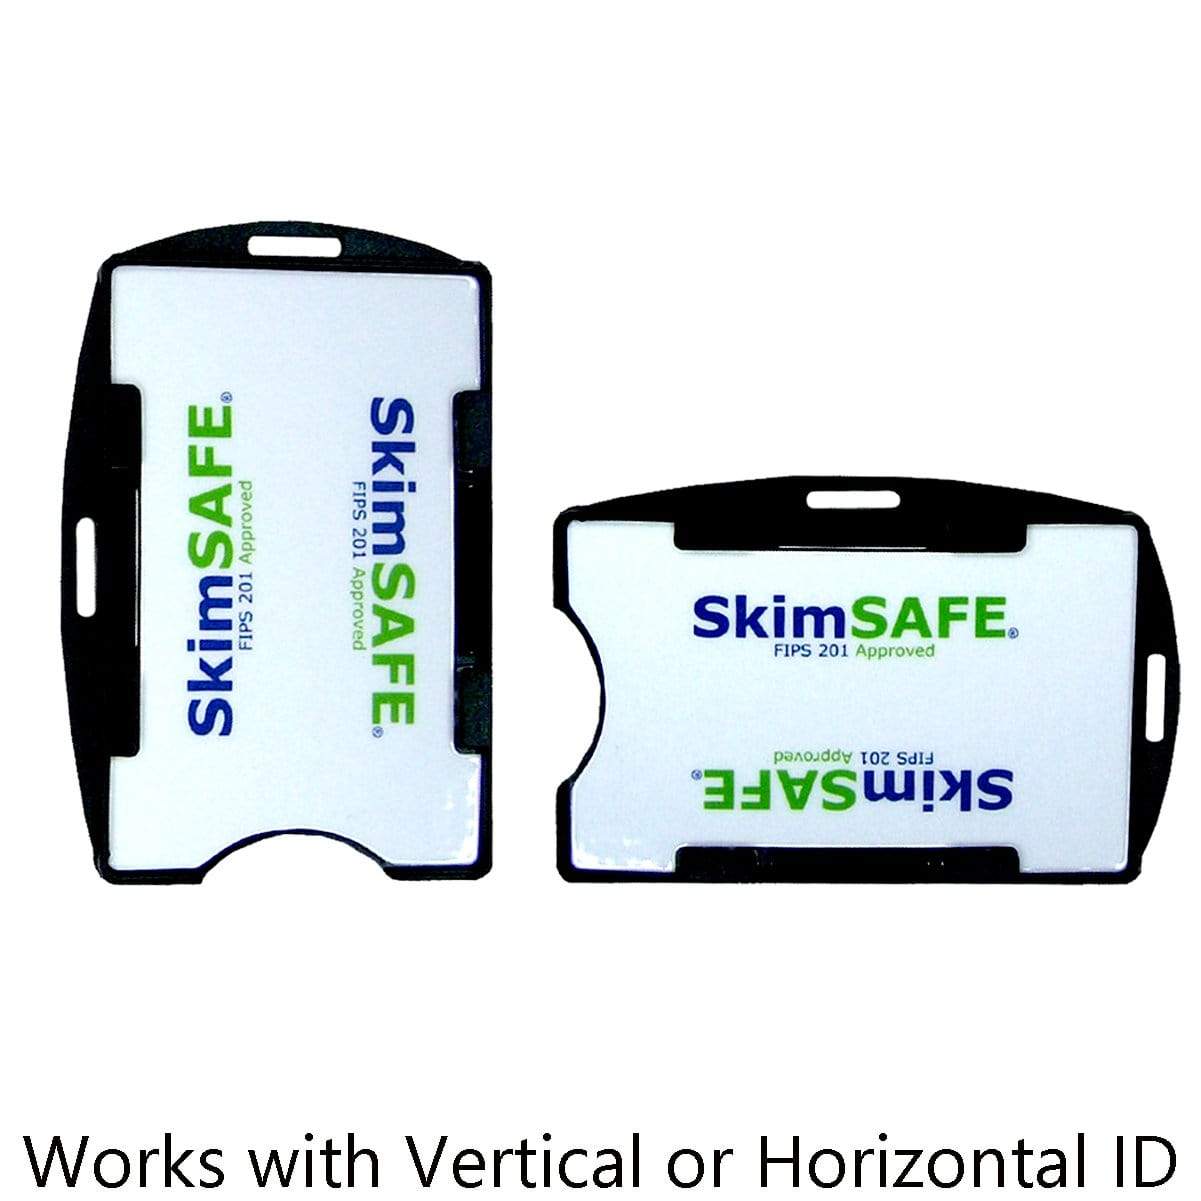 Two SkimSAFE FIPS 201 RFID Blocking 2-Card ID Holders (AH-210), one vertical and one horizontal, designed with RFID blocking to protect IDs from scanning. Text reads "Works with Vertical or Horizontal ID.